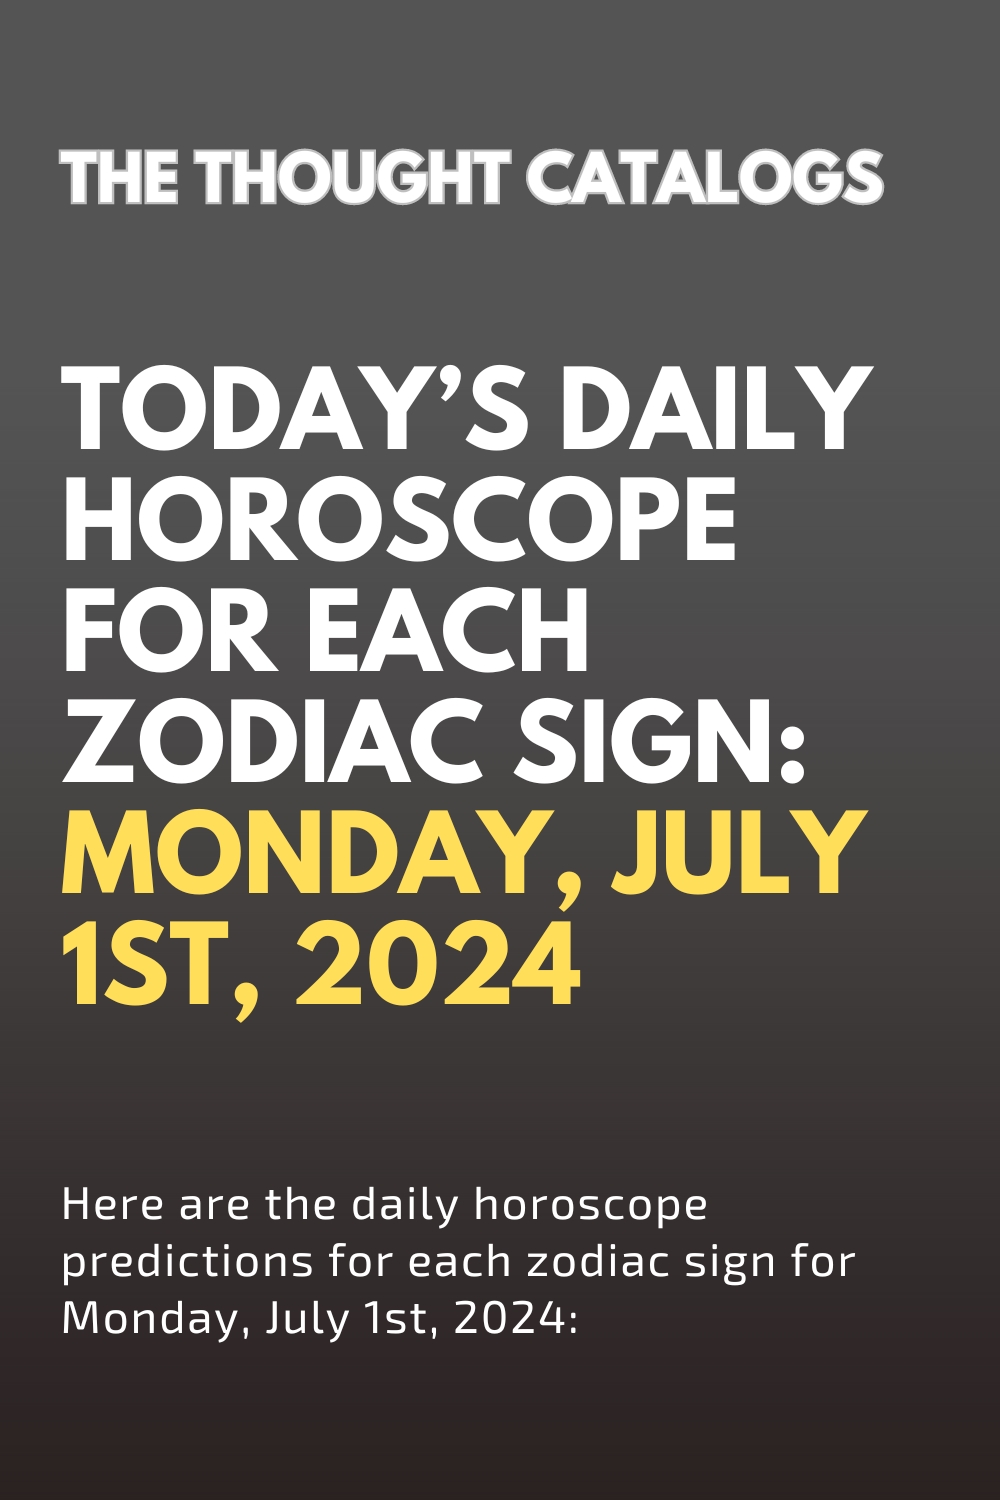 Today’s Daily Horoscope For Each Zodiac Sign: Monday, July 1st, 2024